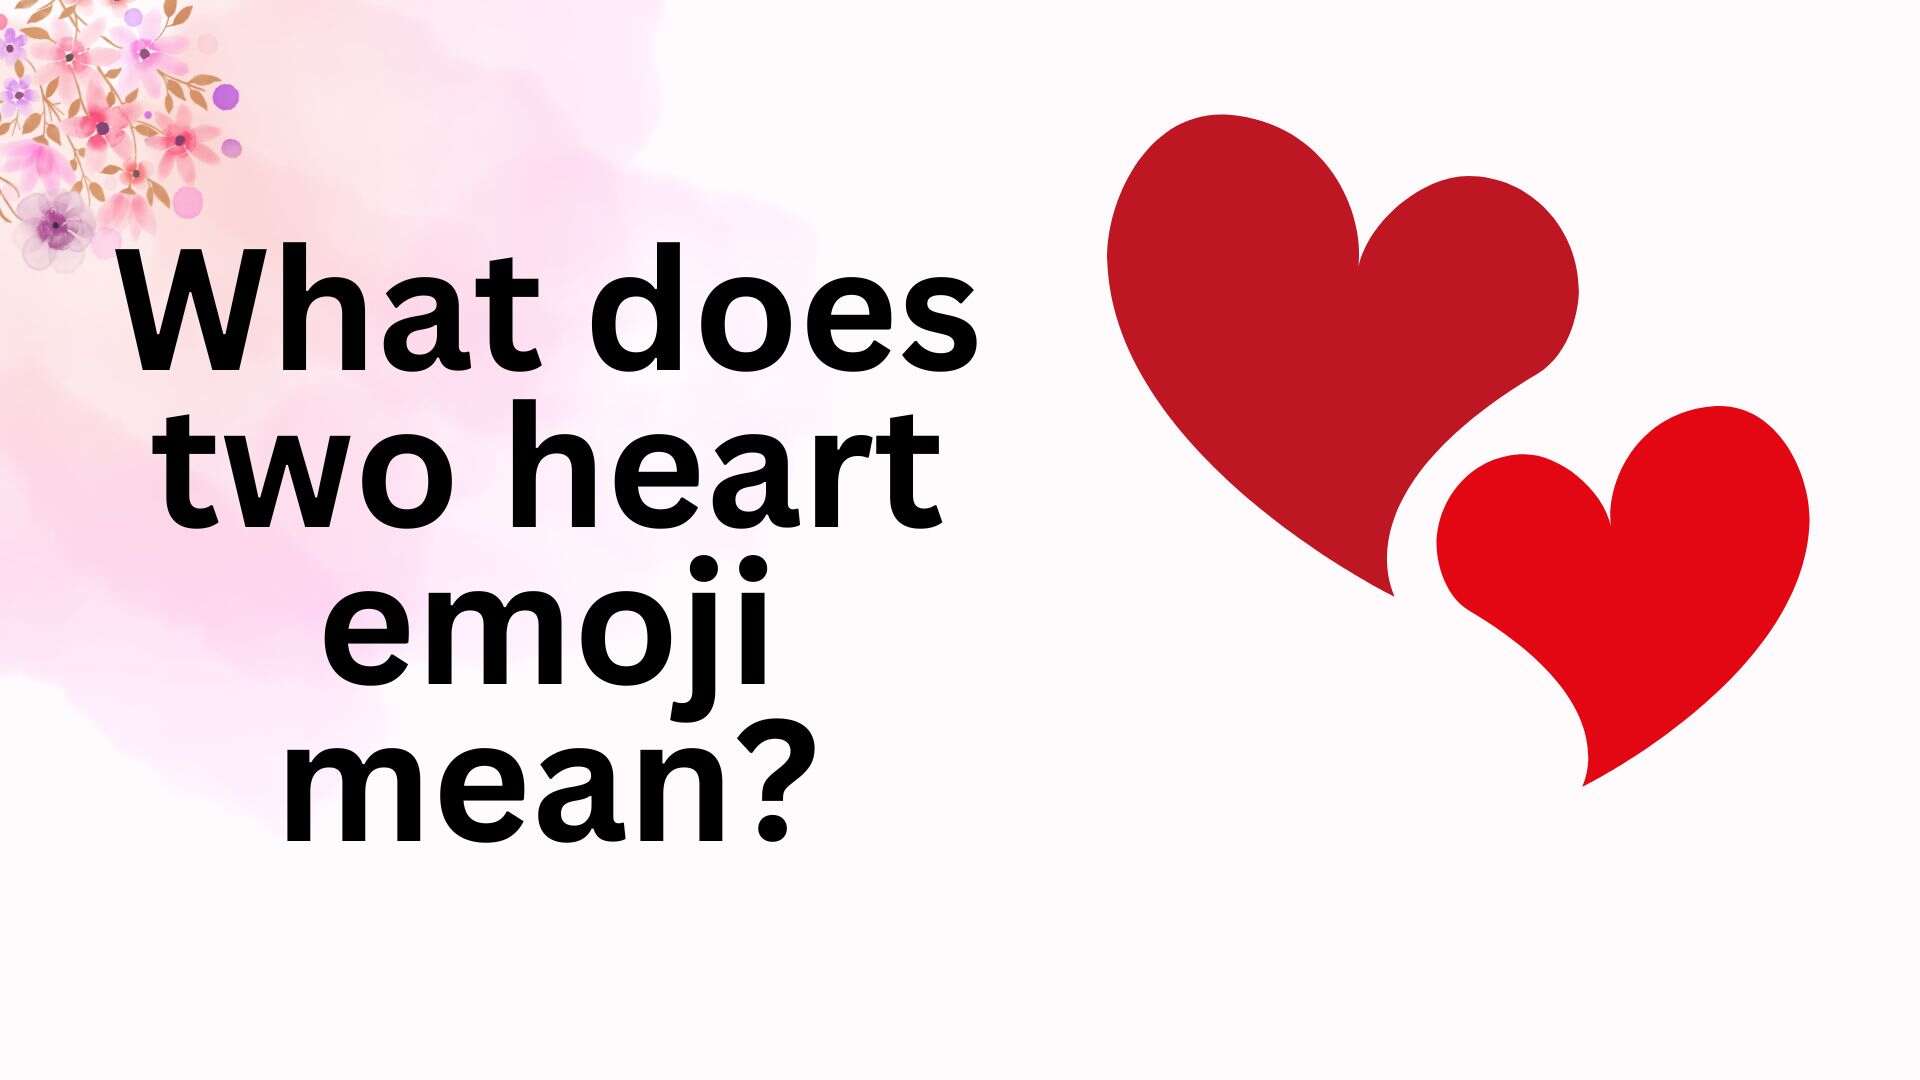 What does two heart emoji mean?